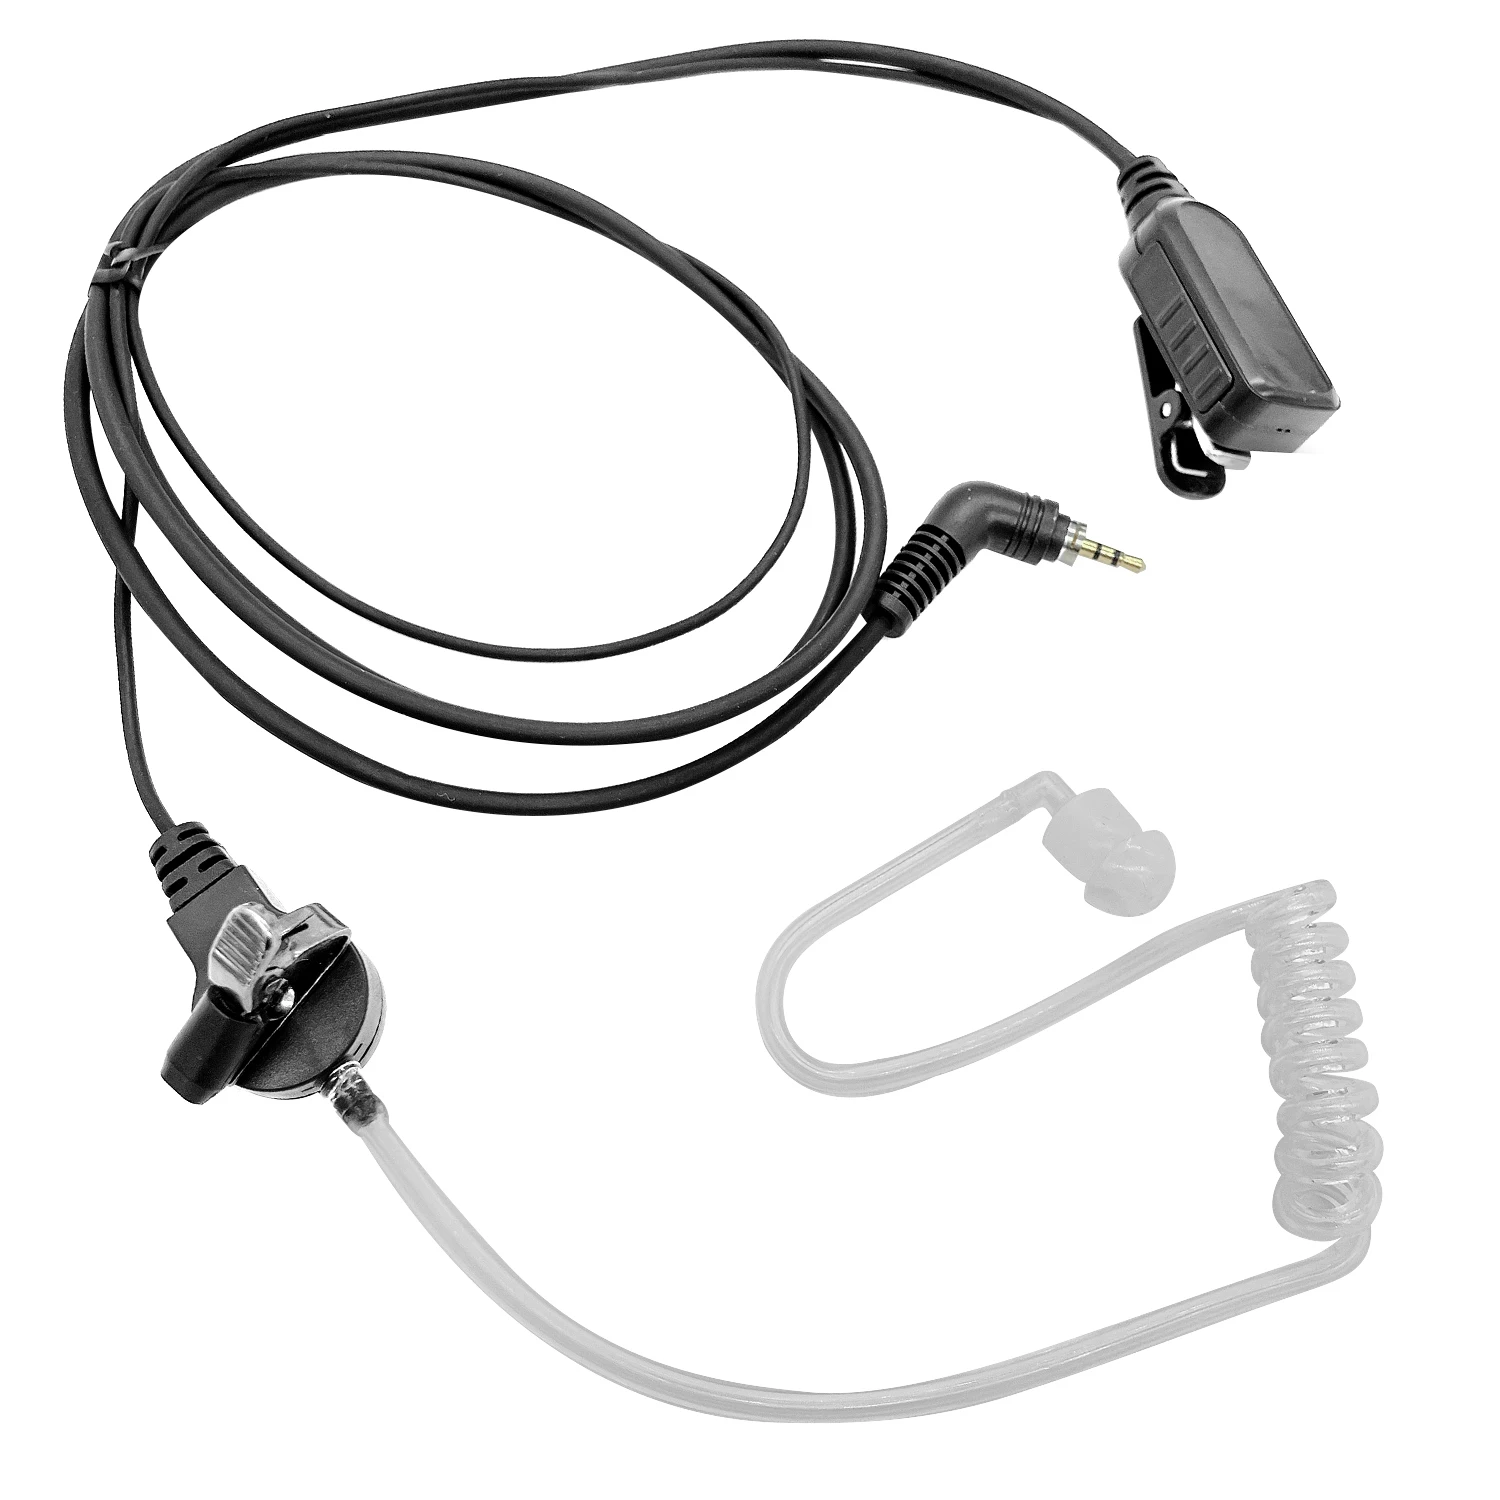 Enlarge Earpiece walkie talkie Compatible with the following Models for motorola Two Way Radio:MTP850